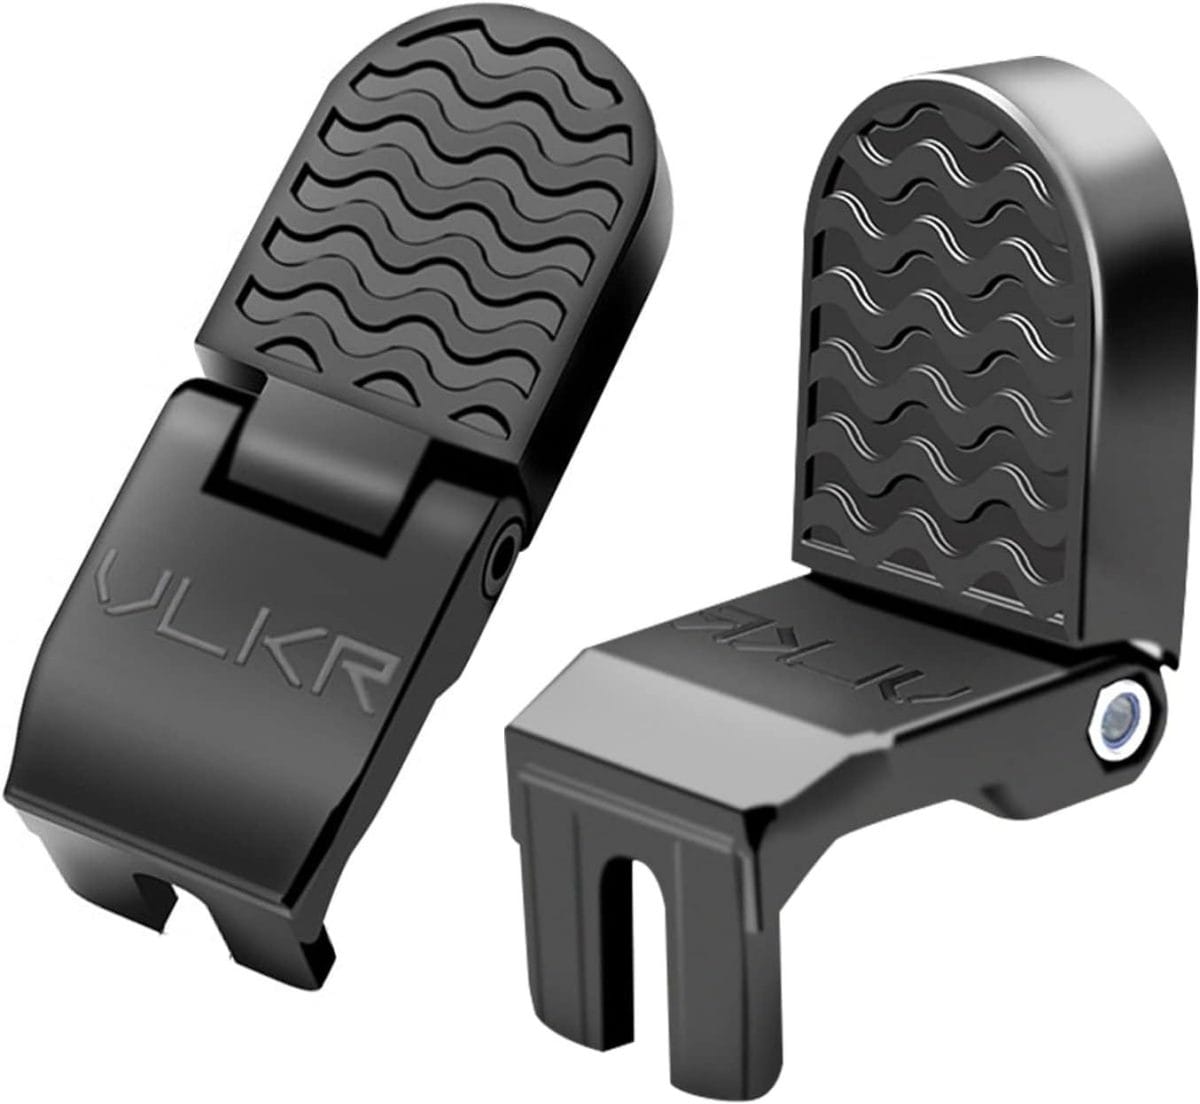 Himiway 1 Pair Bike Rear Pedals, Mini Folding Bike Pegs, Aluminium Alloy Non-Slip Bicycle Footrests, Quick Release Foot Plates Pedals for Mountain Bike E-Bike